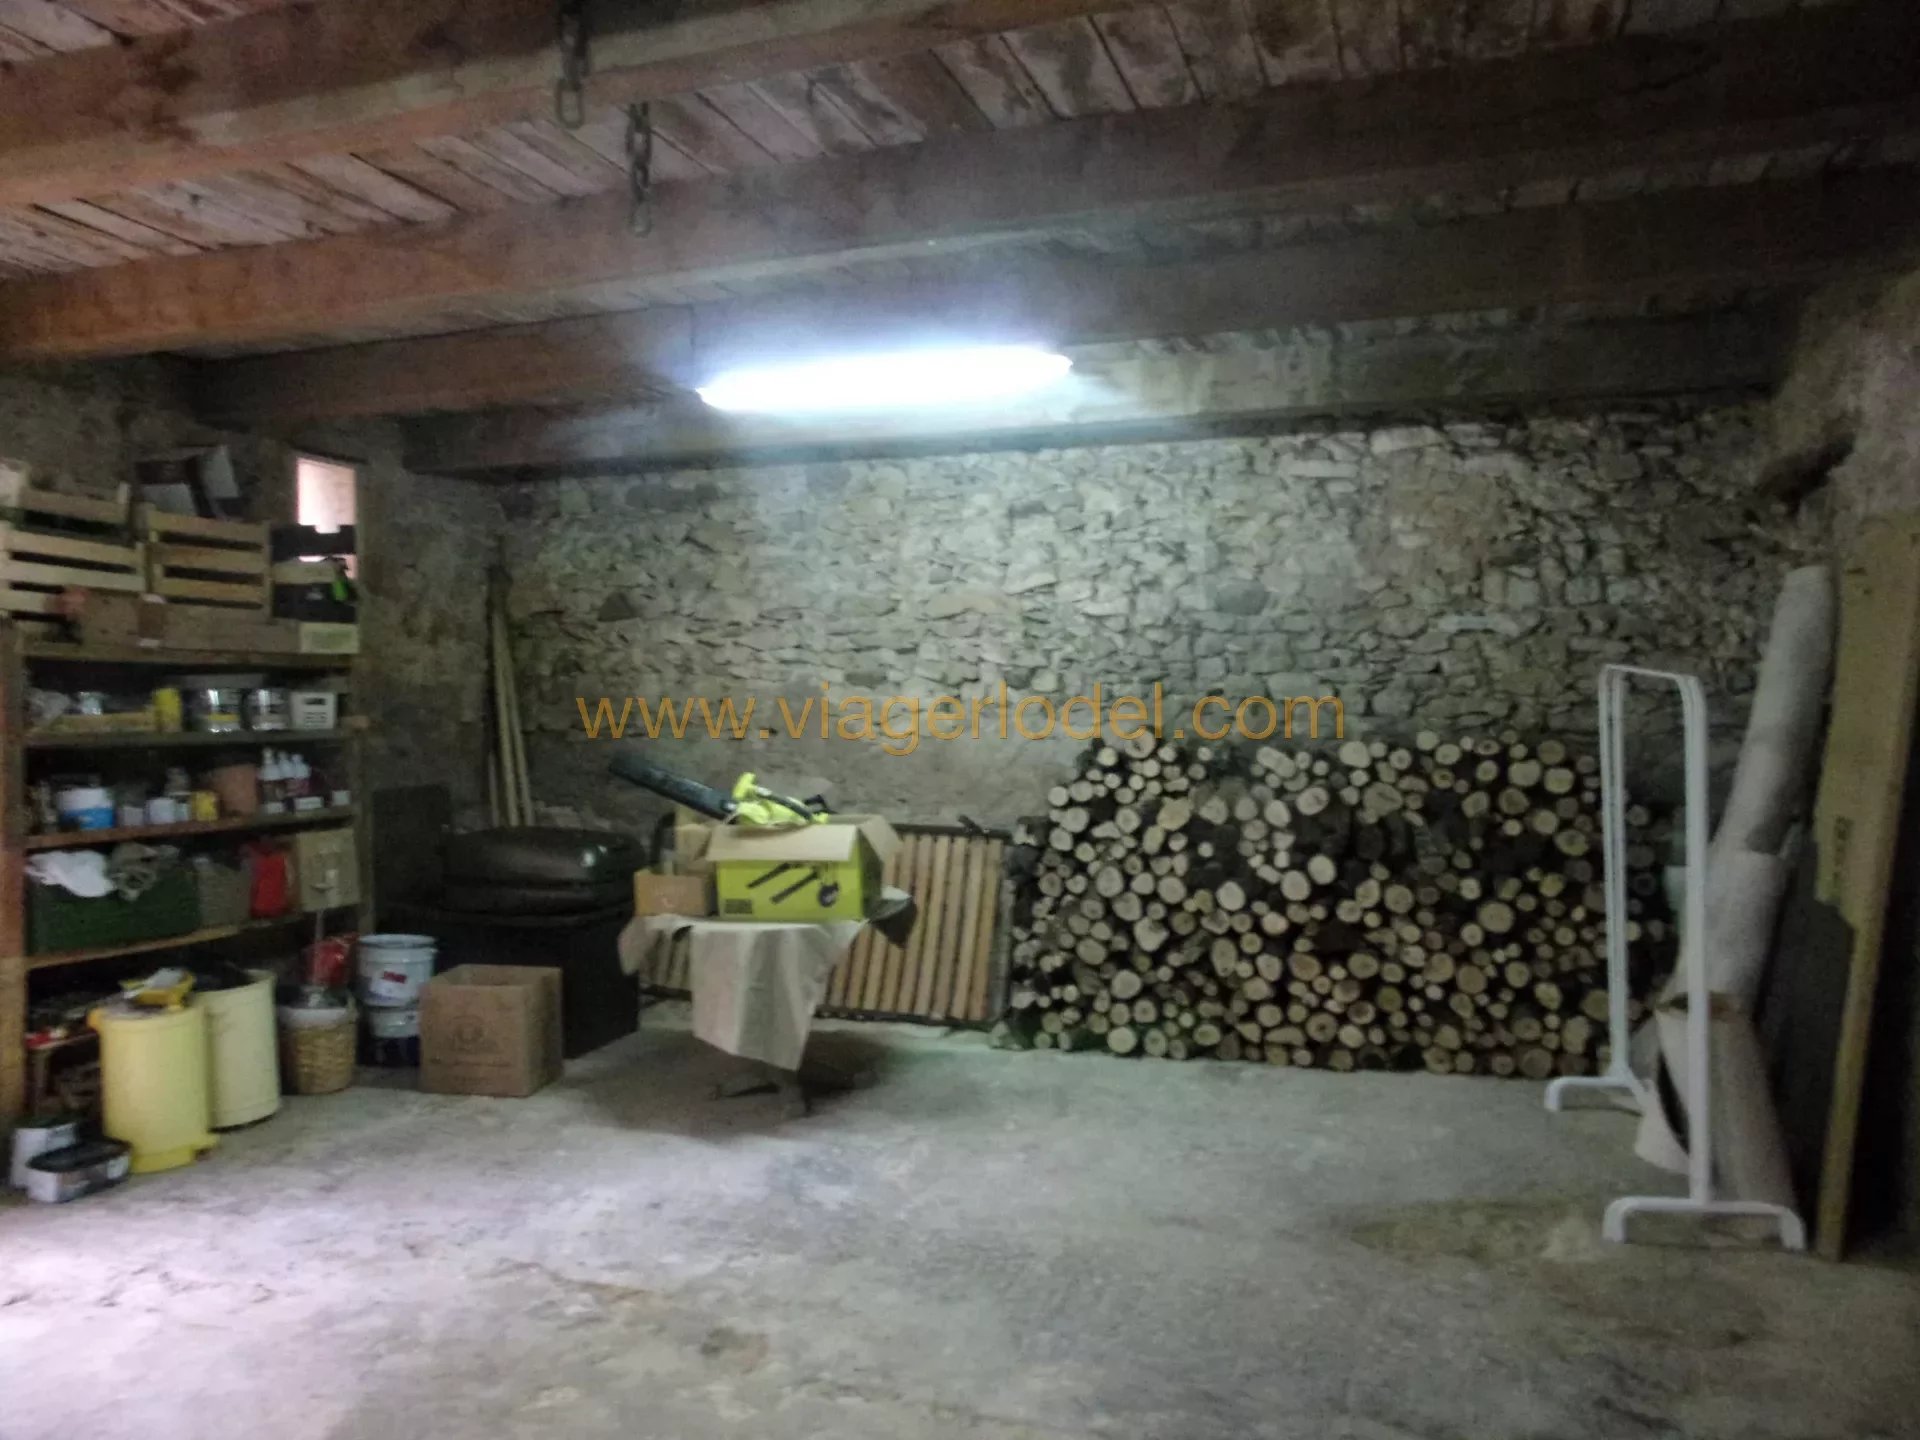 Ref.: 9337 - LIFE ANNUITY - POUZILHAC (30) - Occupied 4-room house